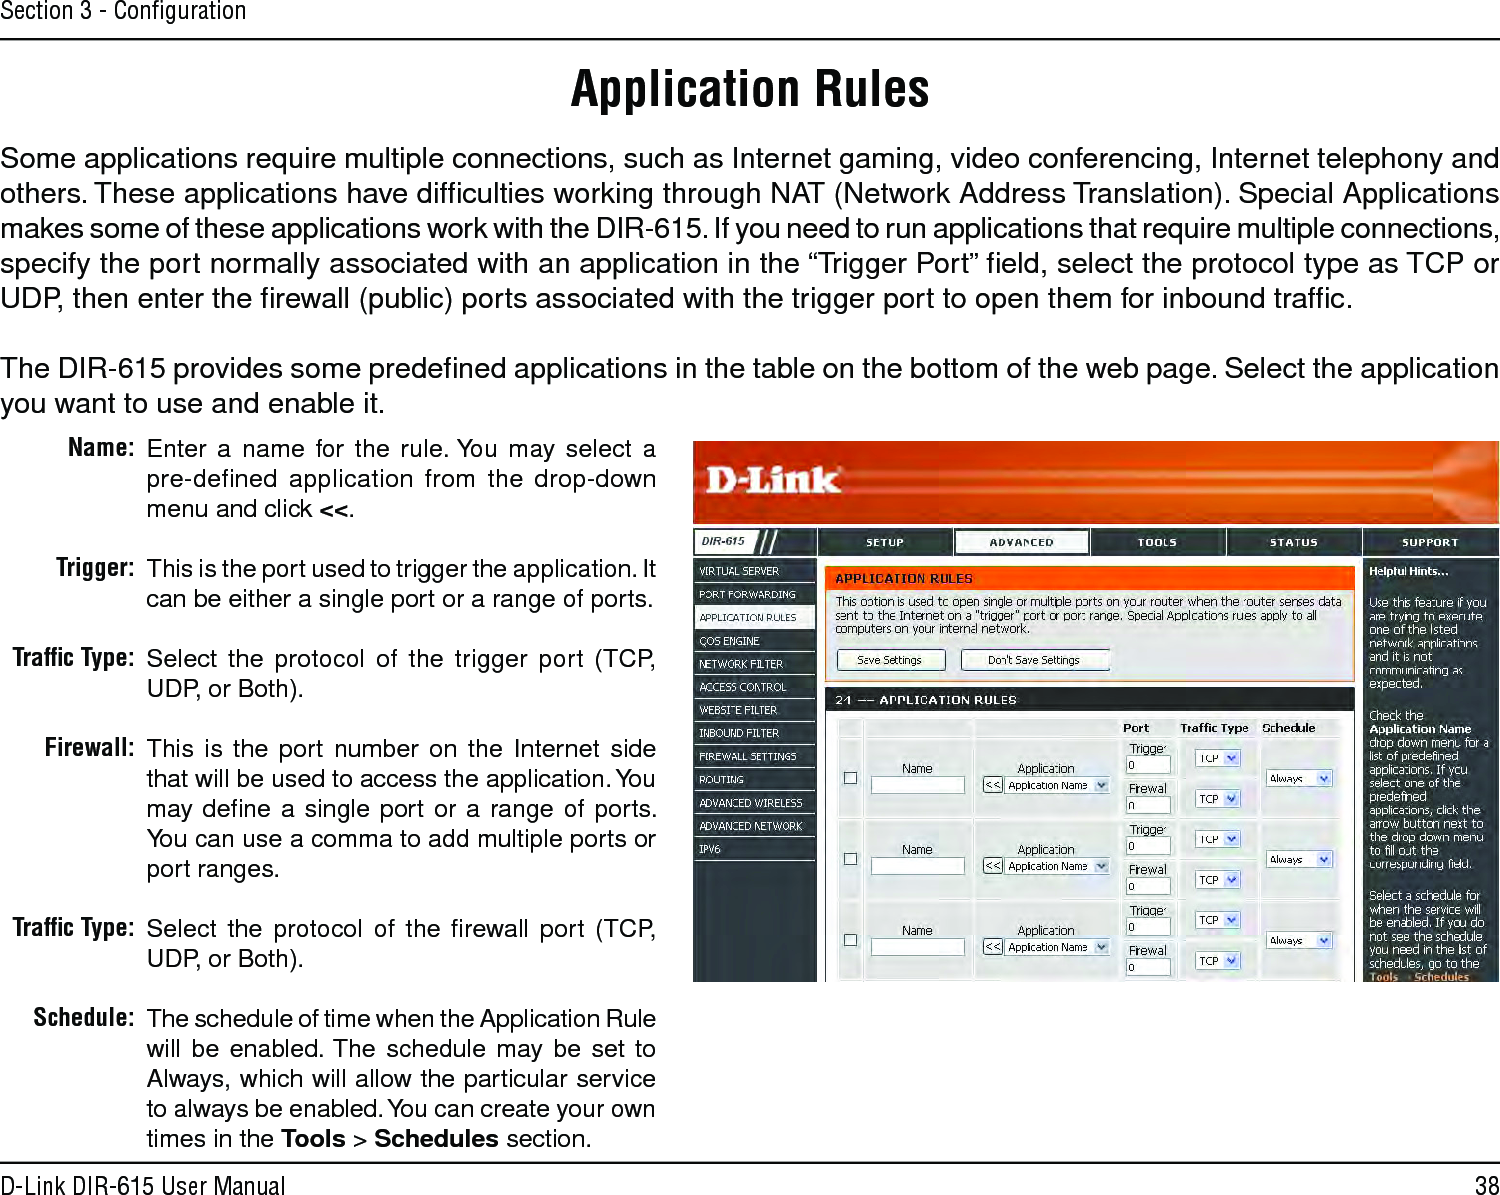 38D-Link DIR-615 User ManualSection 3 - ConﬁgurationEnter  a  name  for  the  rule. You  may  select  a  pre-deﬁned  application  from  the  drop-down menu and click &lt;&lt;.This is the port used to trigger the application. It can be either a single port or a range of ports.Select  the  protocol  of  the  trigger  port  (TCP, UDP, or Both).This  is  the  port  number  on  the  Internet  side that will be used to access the application. You may  deﬁne a  single  port  or  a range of  ports. You can use a comma to add multiple ports or port ranges.Select  the  protocol  of  the  ﬁrewall  port  (TCP, UDP, or Both).The schedule of time when the Application Rule will  be  enabled. The  schedule  may  be  set  to Always, which will allow the particular service to always be enabled. You can create your own times in the Tools &gt; Schedules section.Name:Trigger:Trafﬁc Type:Firewall:Trafﬁc Type:Schedule:Application RulesSome applications require multiple connections, such as Internet gaming, video conferencing, Internet telephony and others. These applications have difﬁculties working through NAT (Network Address Translation). Special Applications makes some of these applications work with the DIR-615. If you need to run applications that require multiple connections, specify the port normally associated with an application in the “Trigger Port” ﬁeld, select the protocol type as TCP or UDP, then enter the ﬁrewall (public) ports associated with the trigger port to open them for inbound trafﬁc.The DIR-615 provides some predeﬁned applications in the table on the bottom of the web page. Select the application you want to use and enable it.